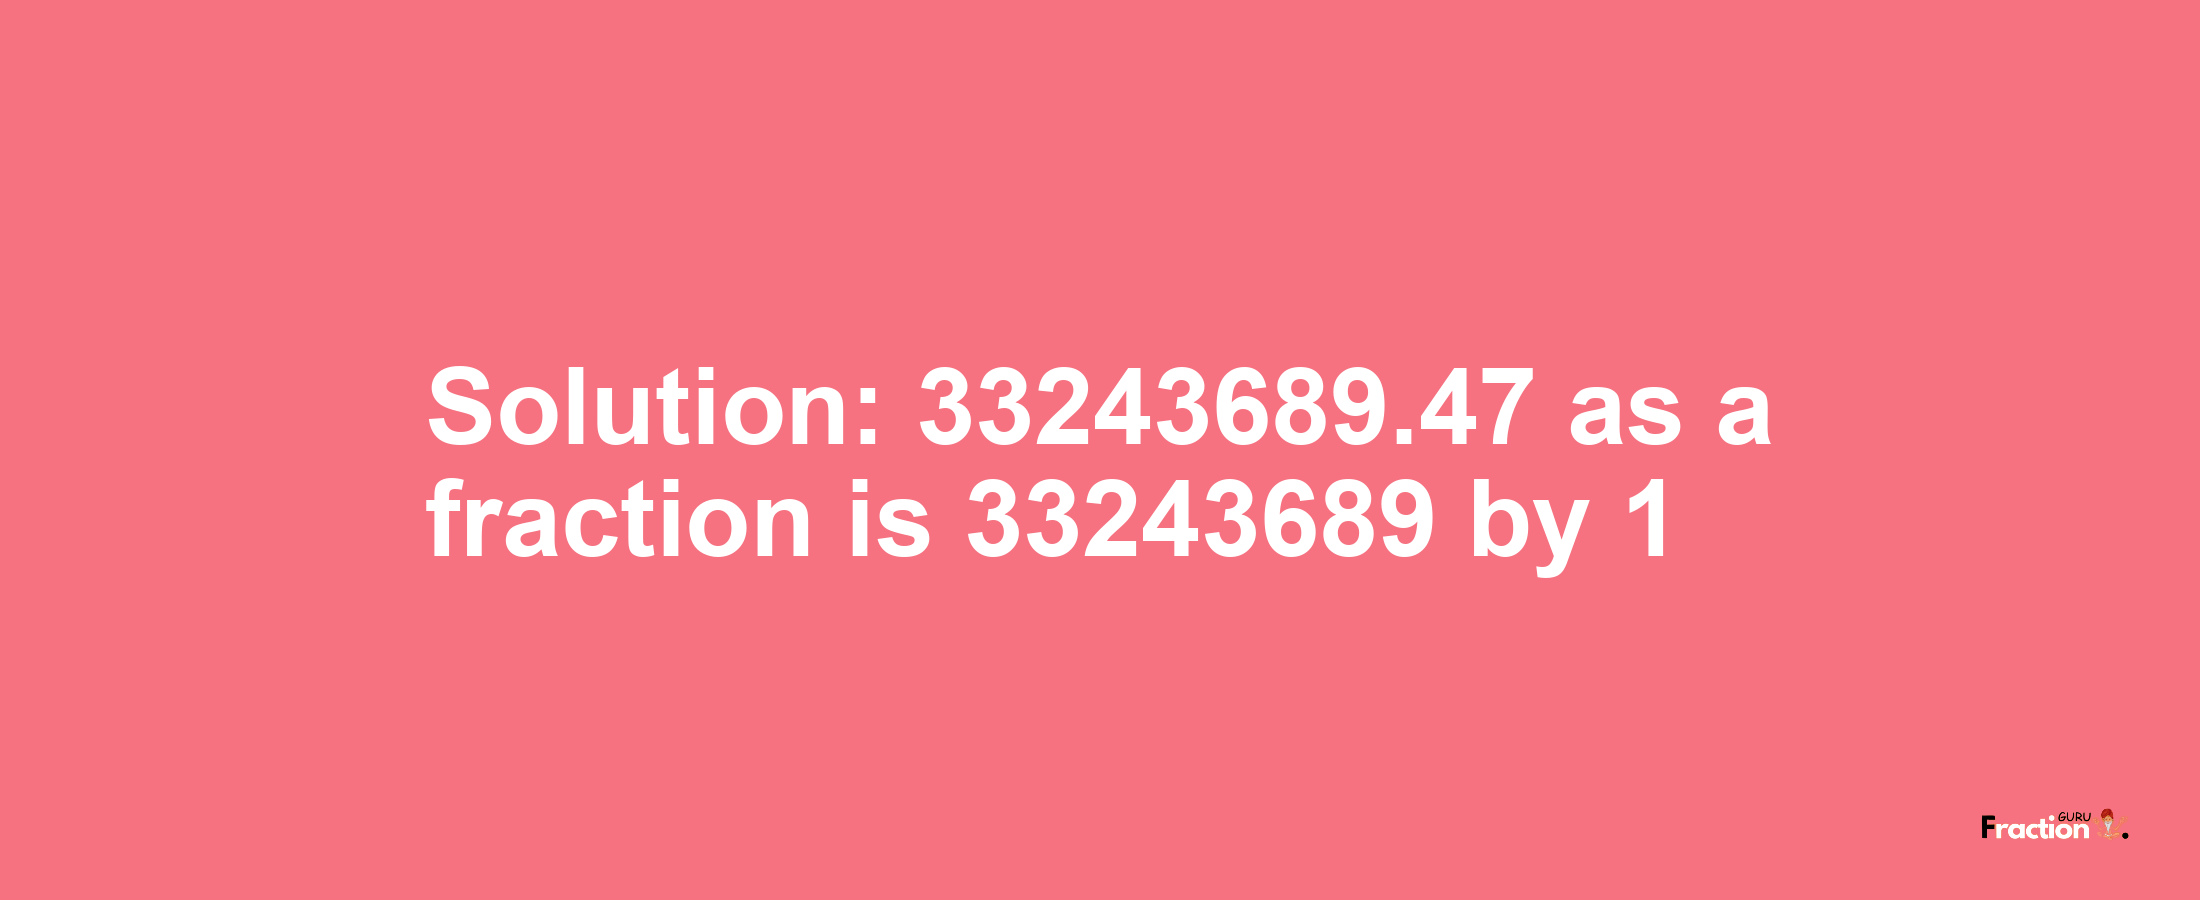 Solution:33243689.47 as a fraction is 33243689/1